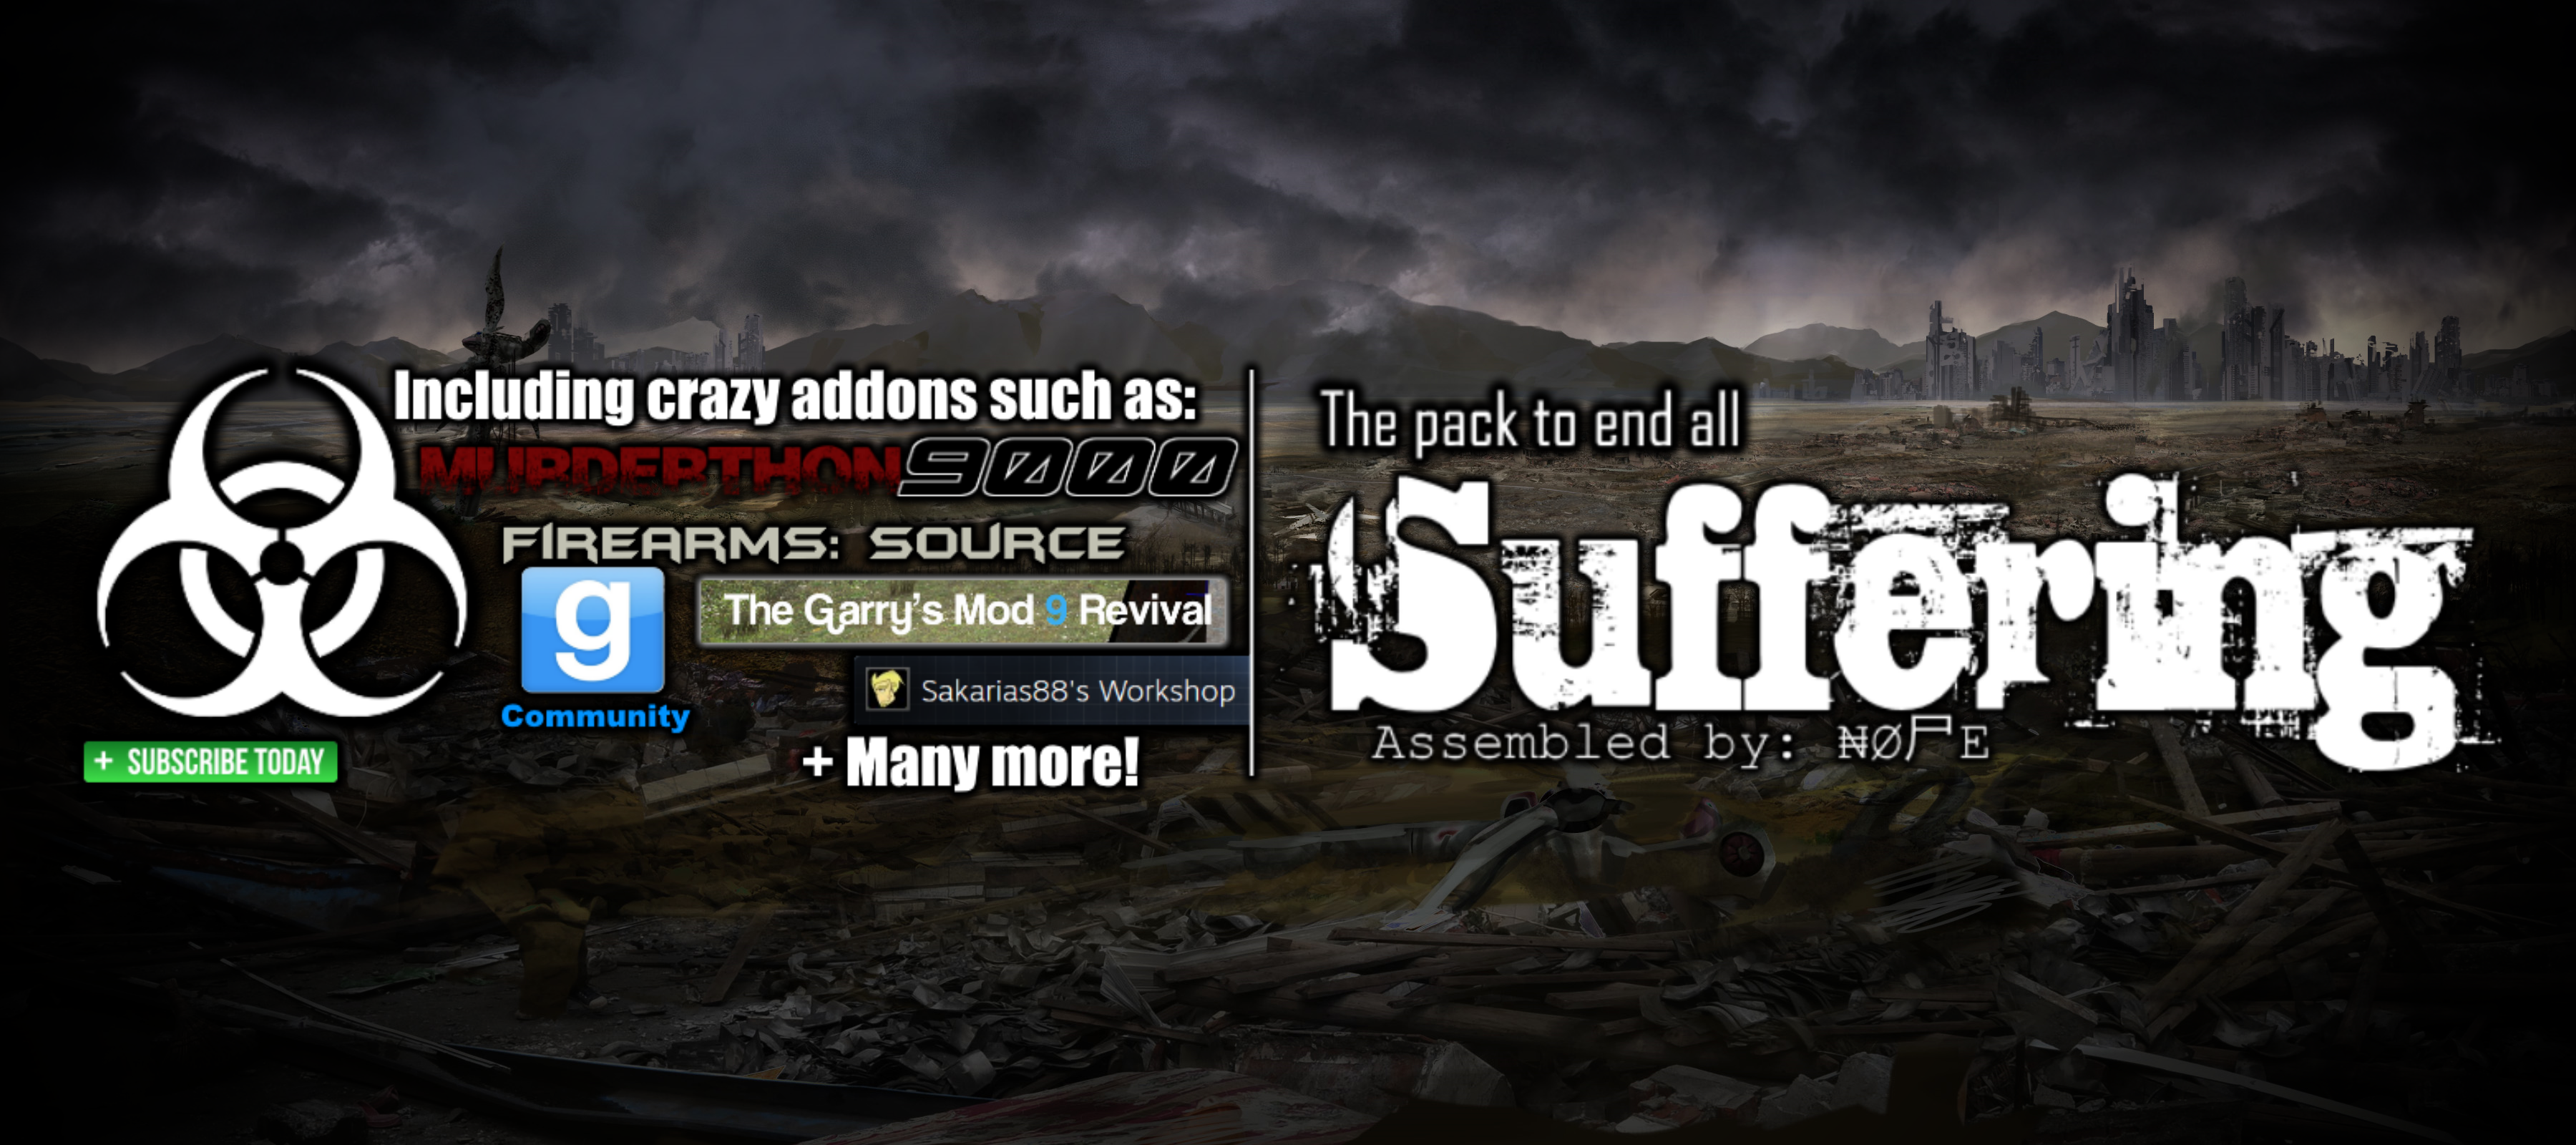 Steam Workshop :: THE PACK TO END ALL SUFFERING - 